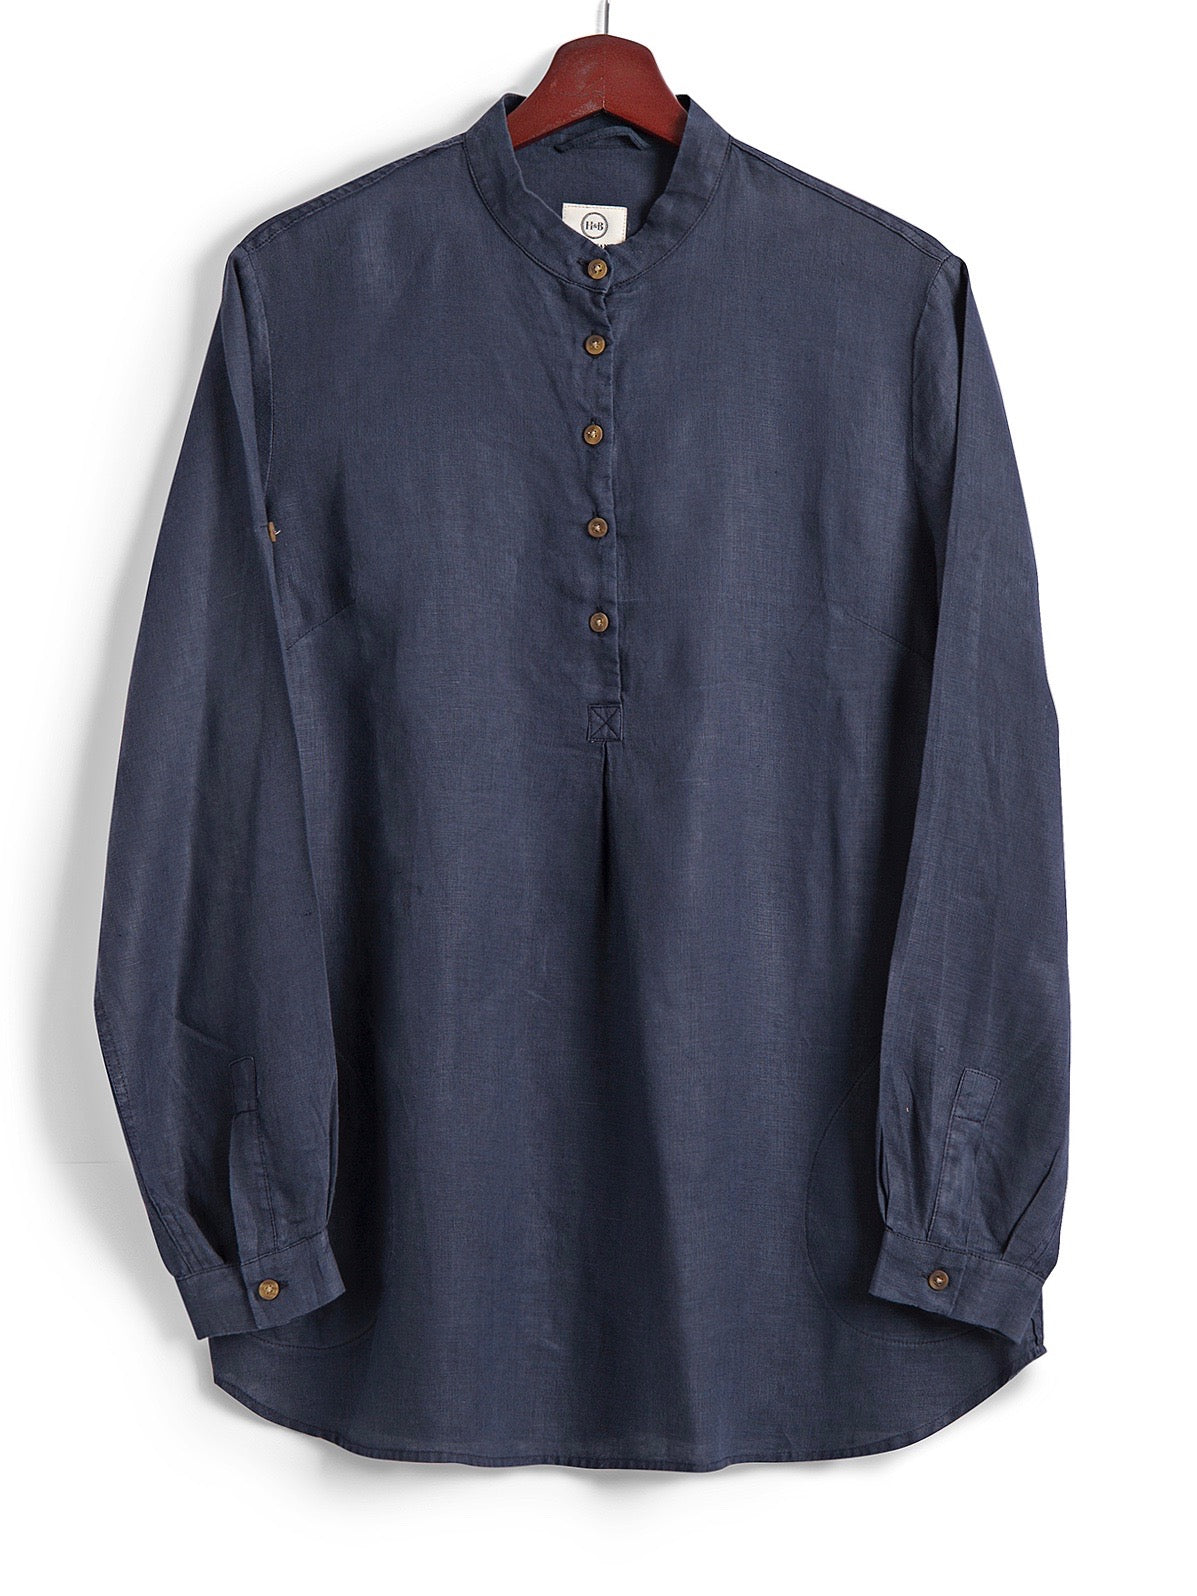 New Tunic in Navy Linen, Shirt, Hickman & Bousfield - Hickman & Bousfield, Safari and Travel Clothing